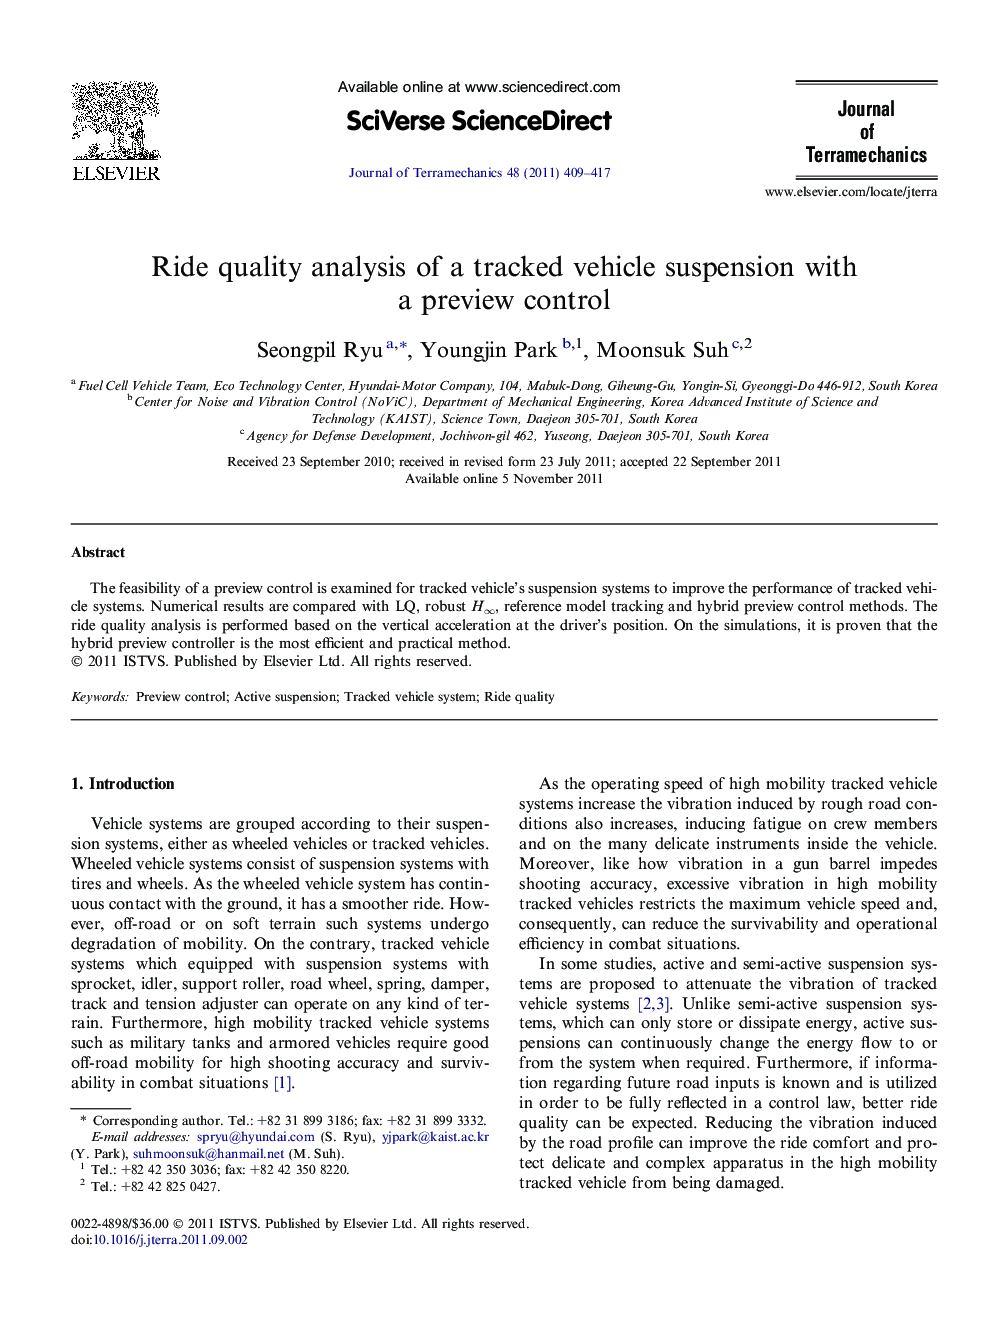 Ride quality analysis of a tracked vehicle suspension with a preview control